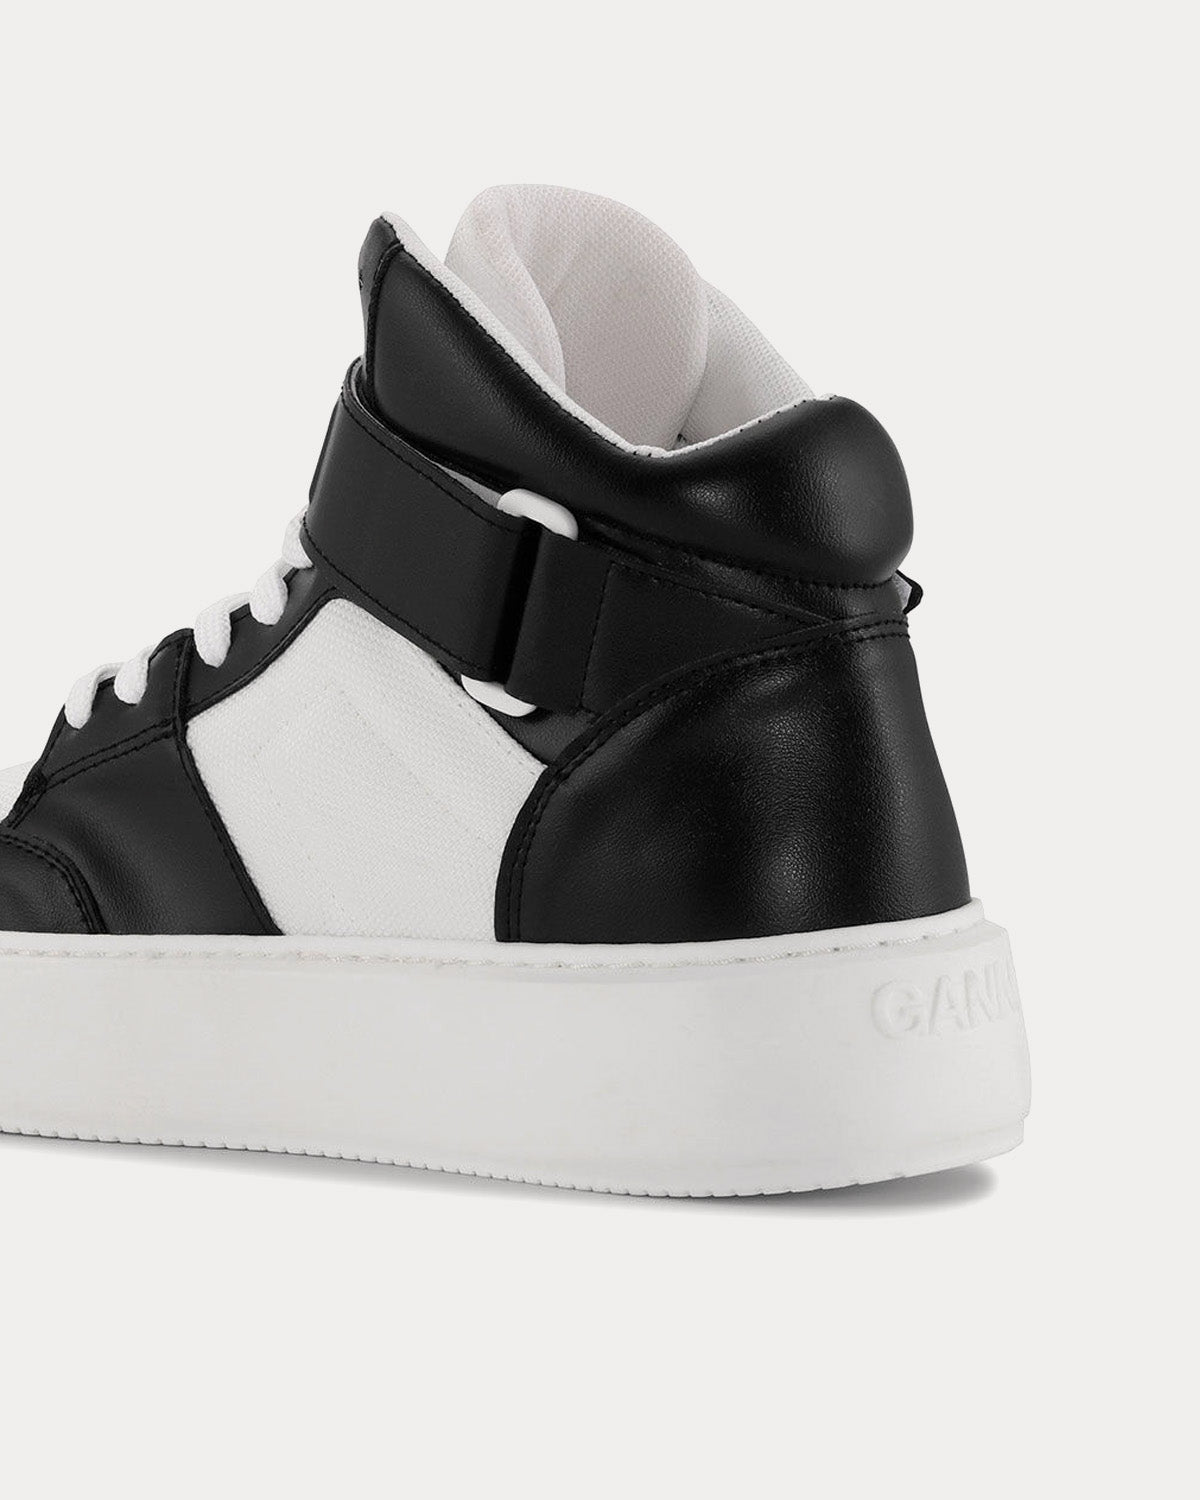 Ganni - Sporty Mix Black / White High Top Sneakers